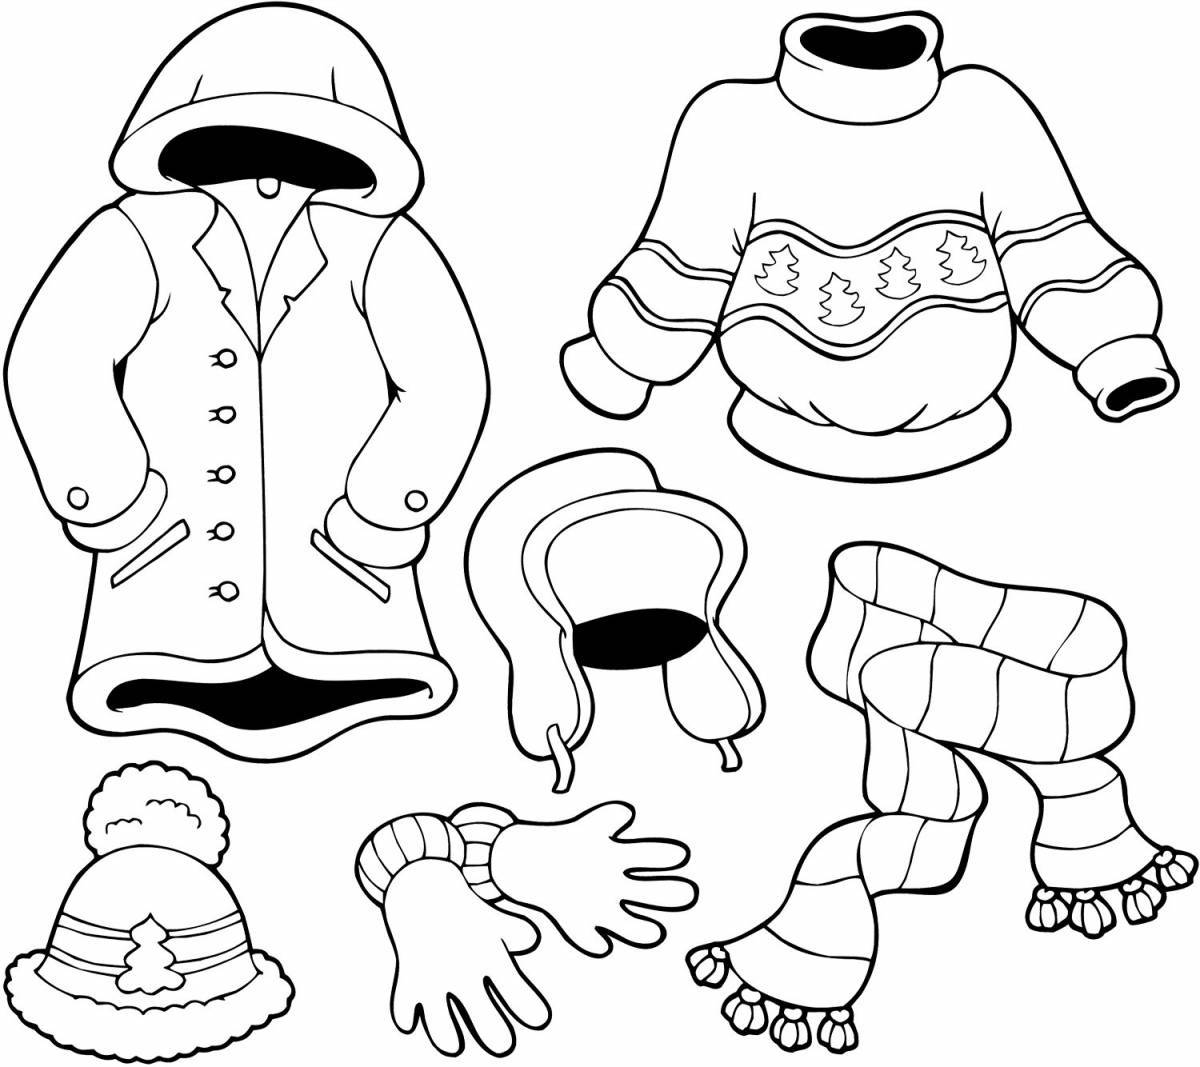 Coloring pages with fun clothes for kids 5-6 years old